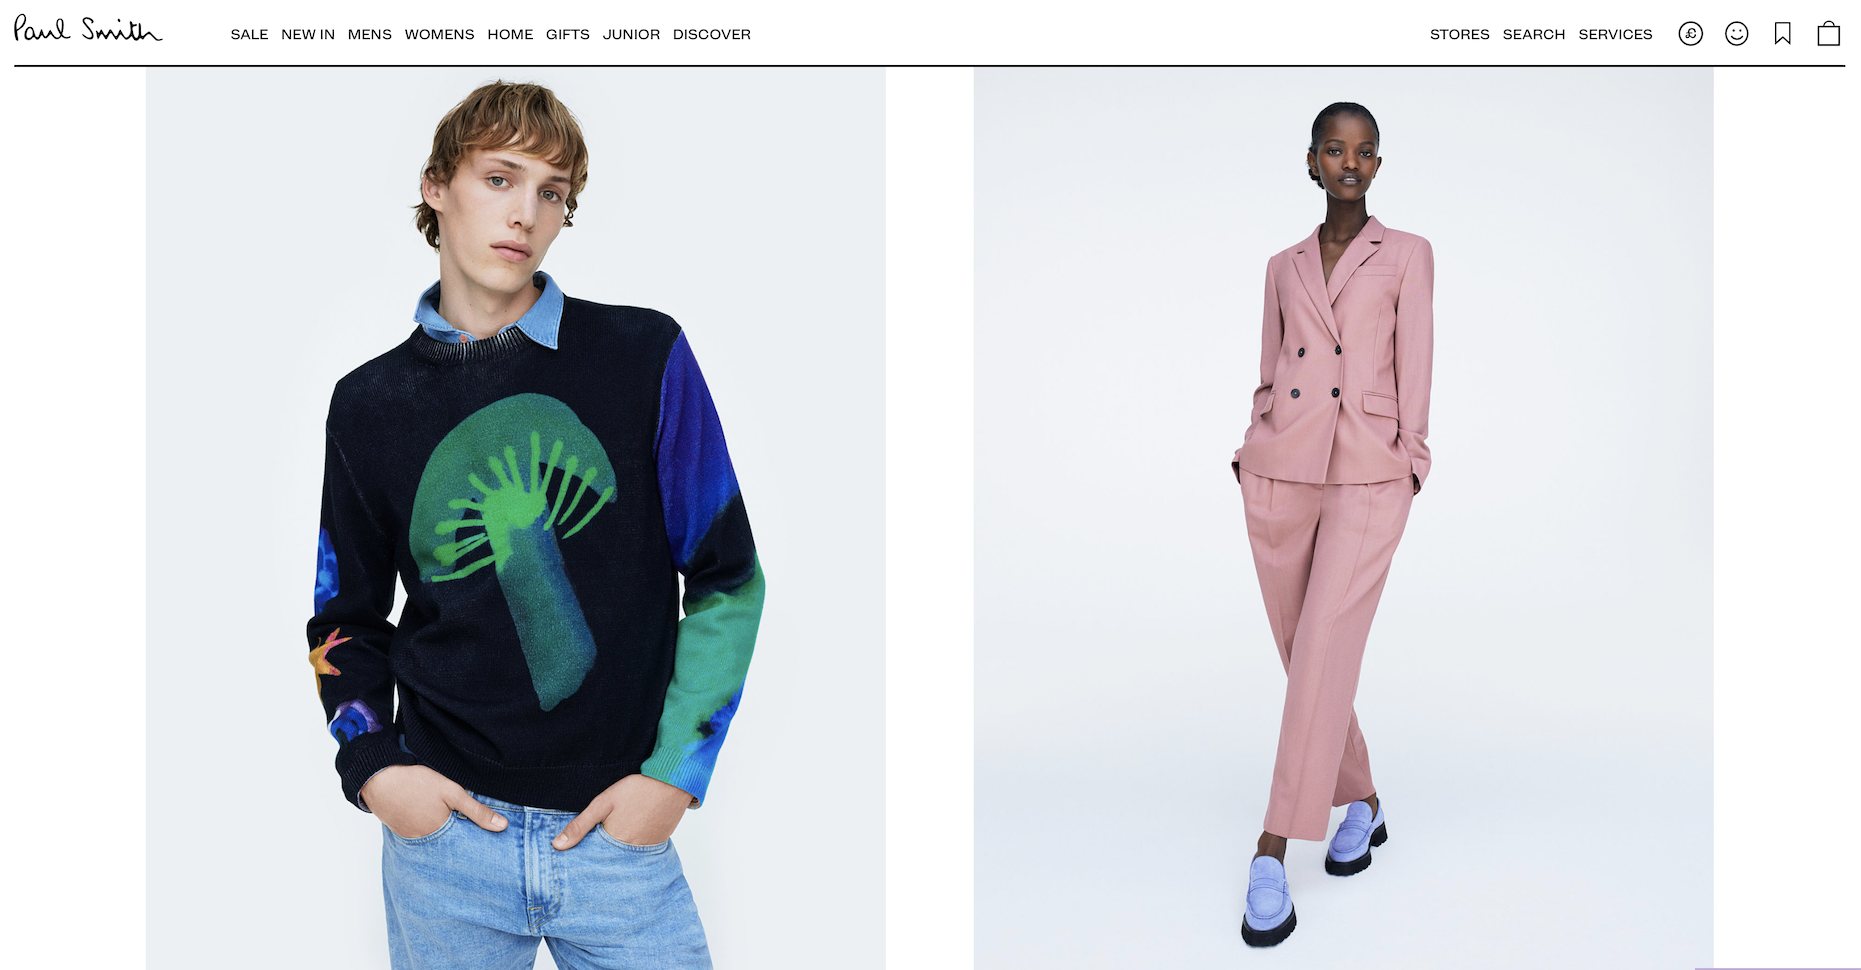 Paul Smith’s Latest Financial Report: Sales Recover, Losses Narrow, E-Commerce and Orders are Strong